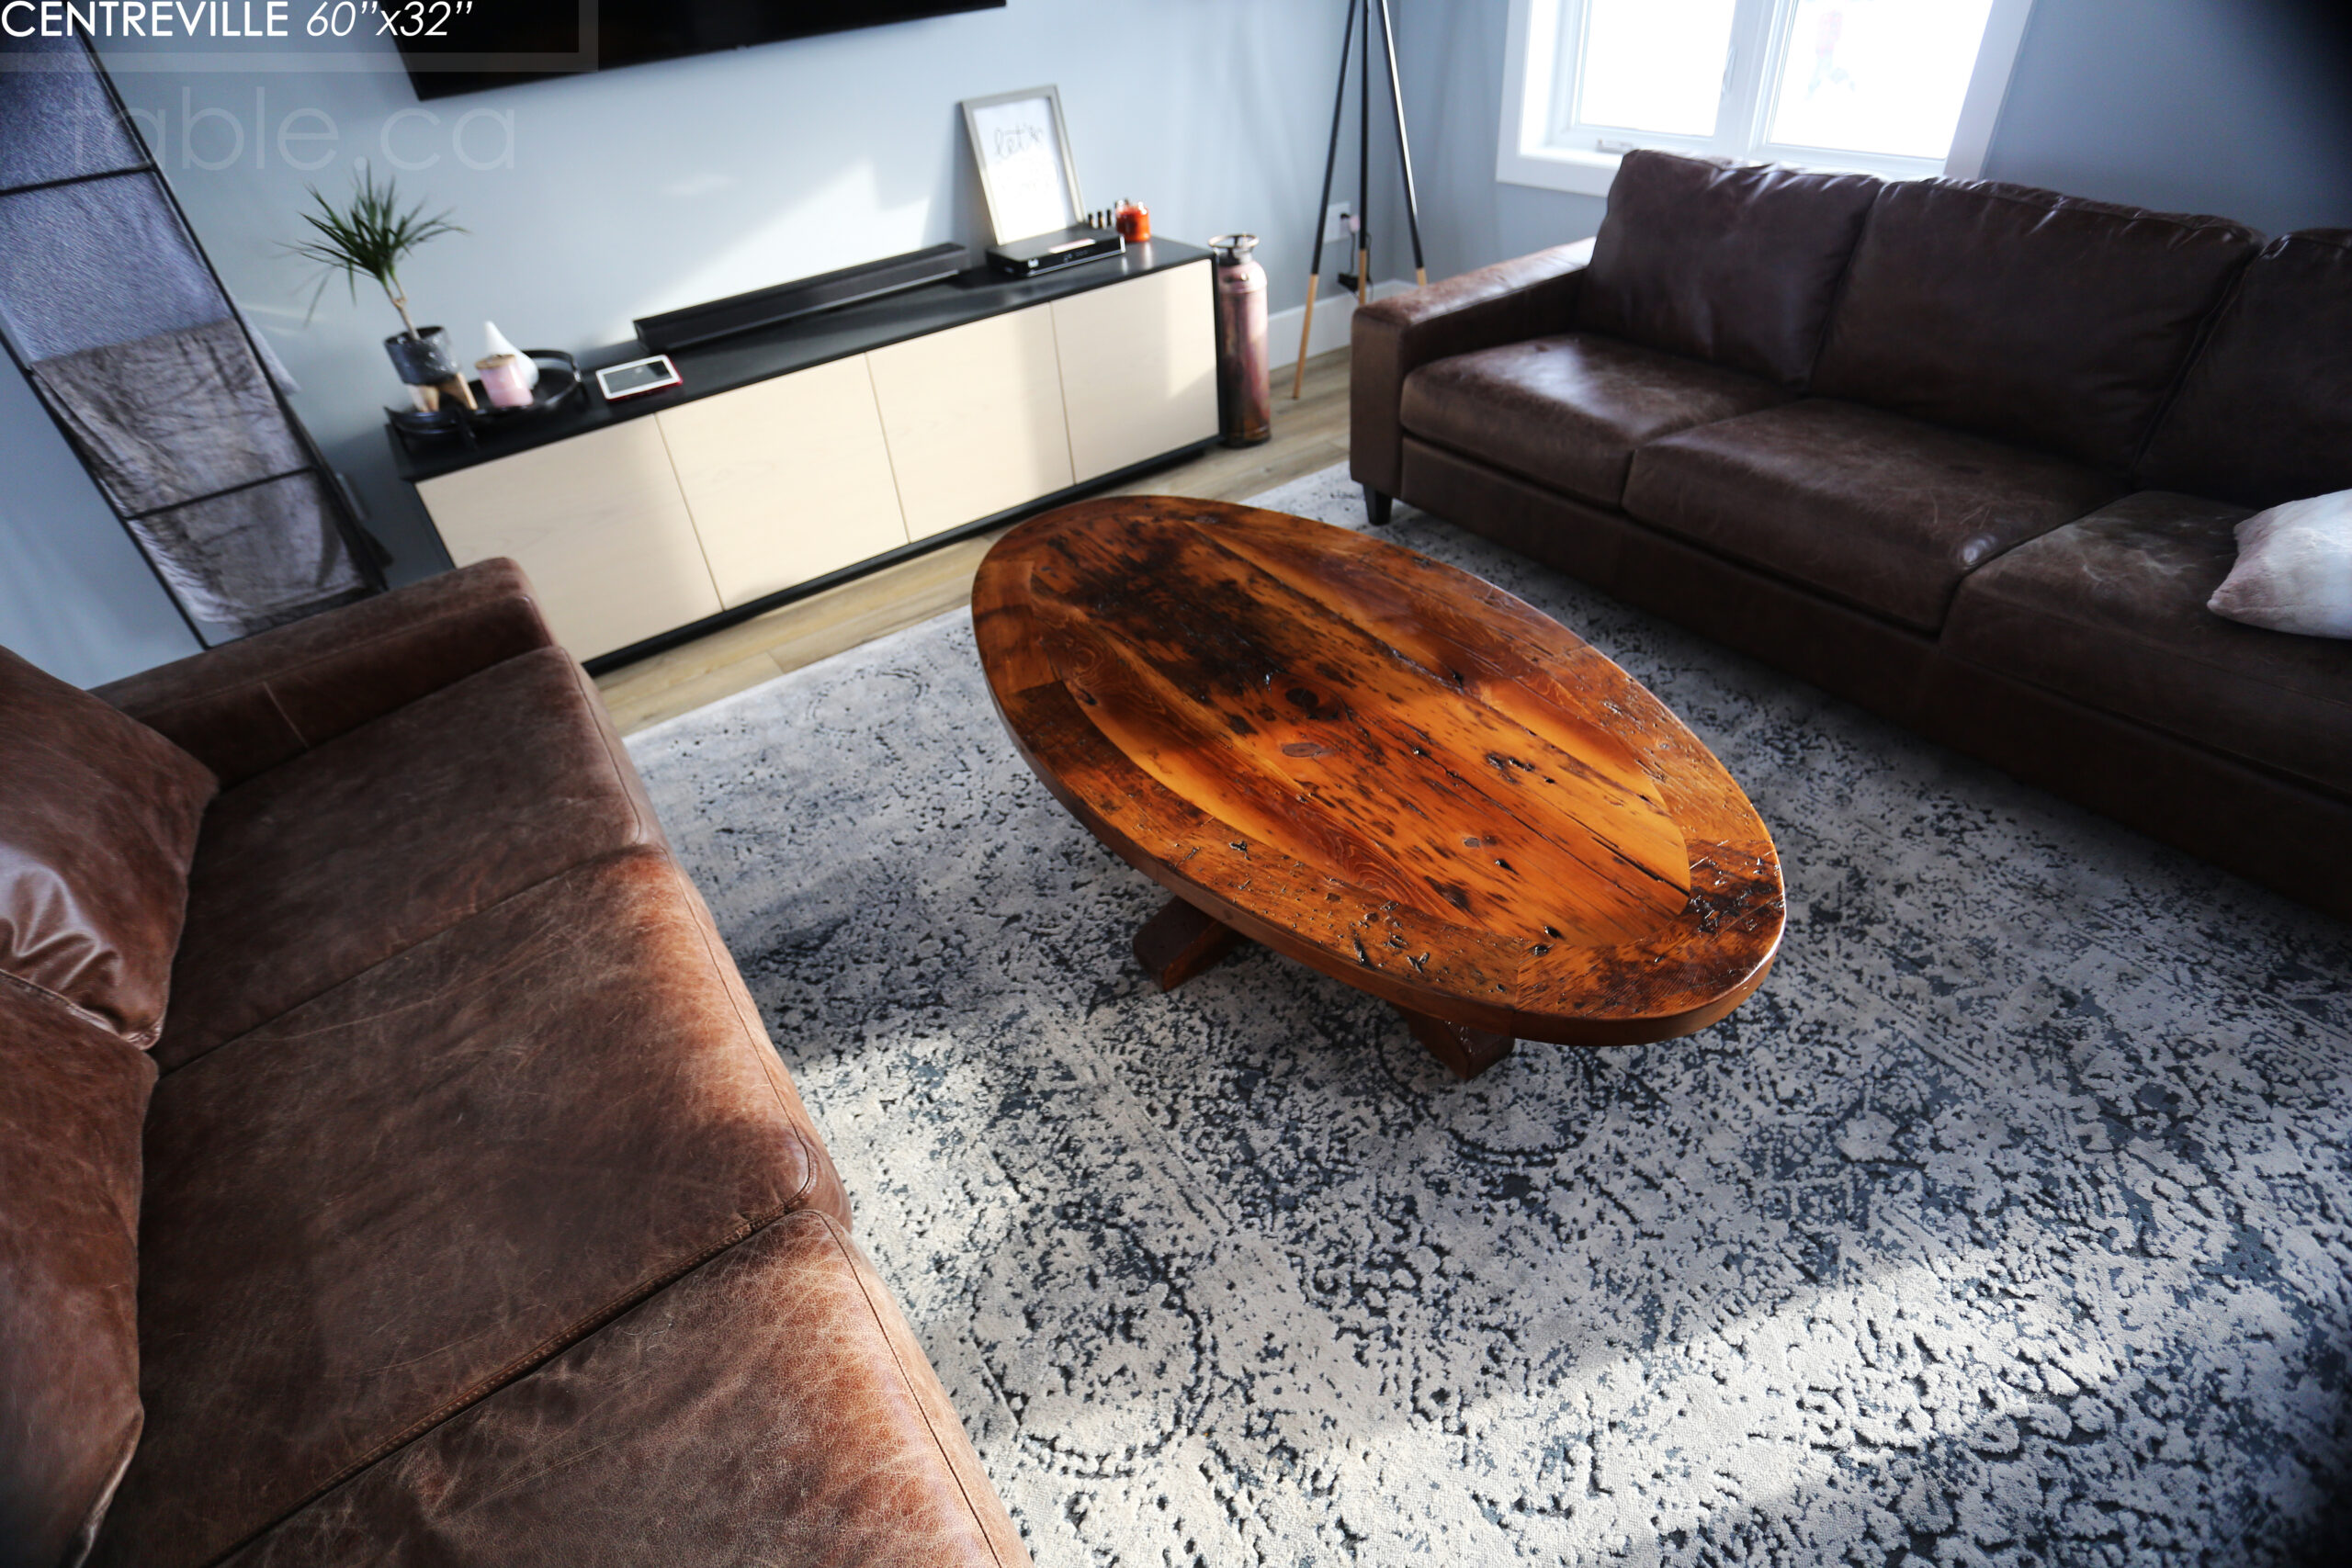 60" Ontario Barnwood Coffee Table we made for an Ingersoll, Ontario home - 32" wide in centre - Eliptical shaped - Hand-Hewn Beam Pedestal Base - 2" Old Growth Pine Threshing Floor Construction top - Original edges & distressing maintained - Satin polyurethane finish - www.table.ca